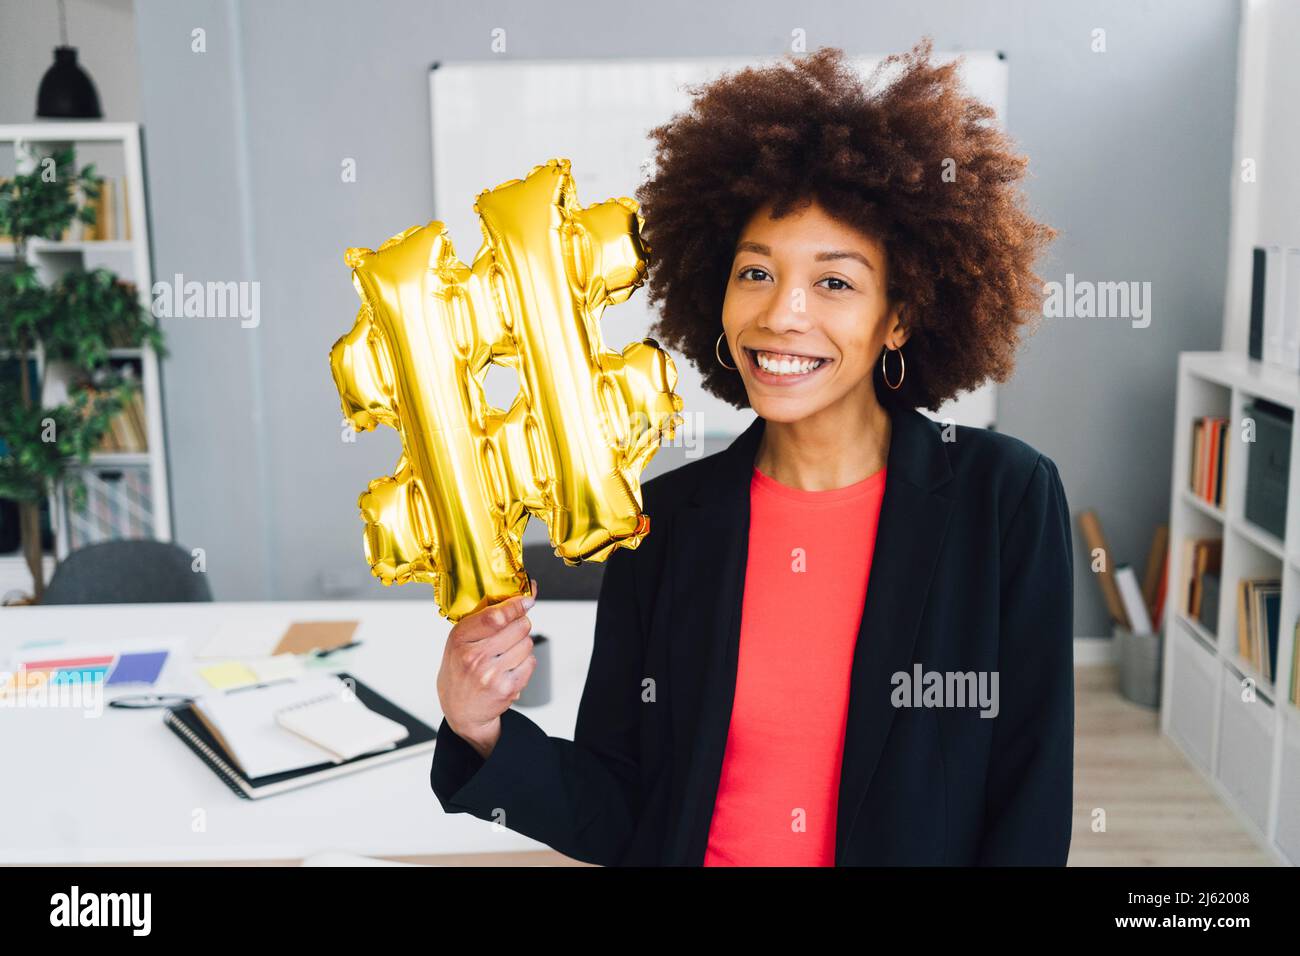 Smiling businesswoman with golden hashtag symbol balloon in office Stock Photo